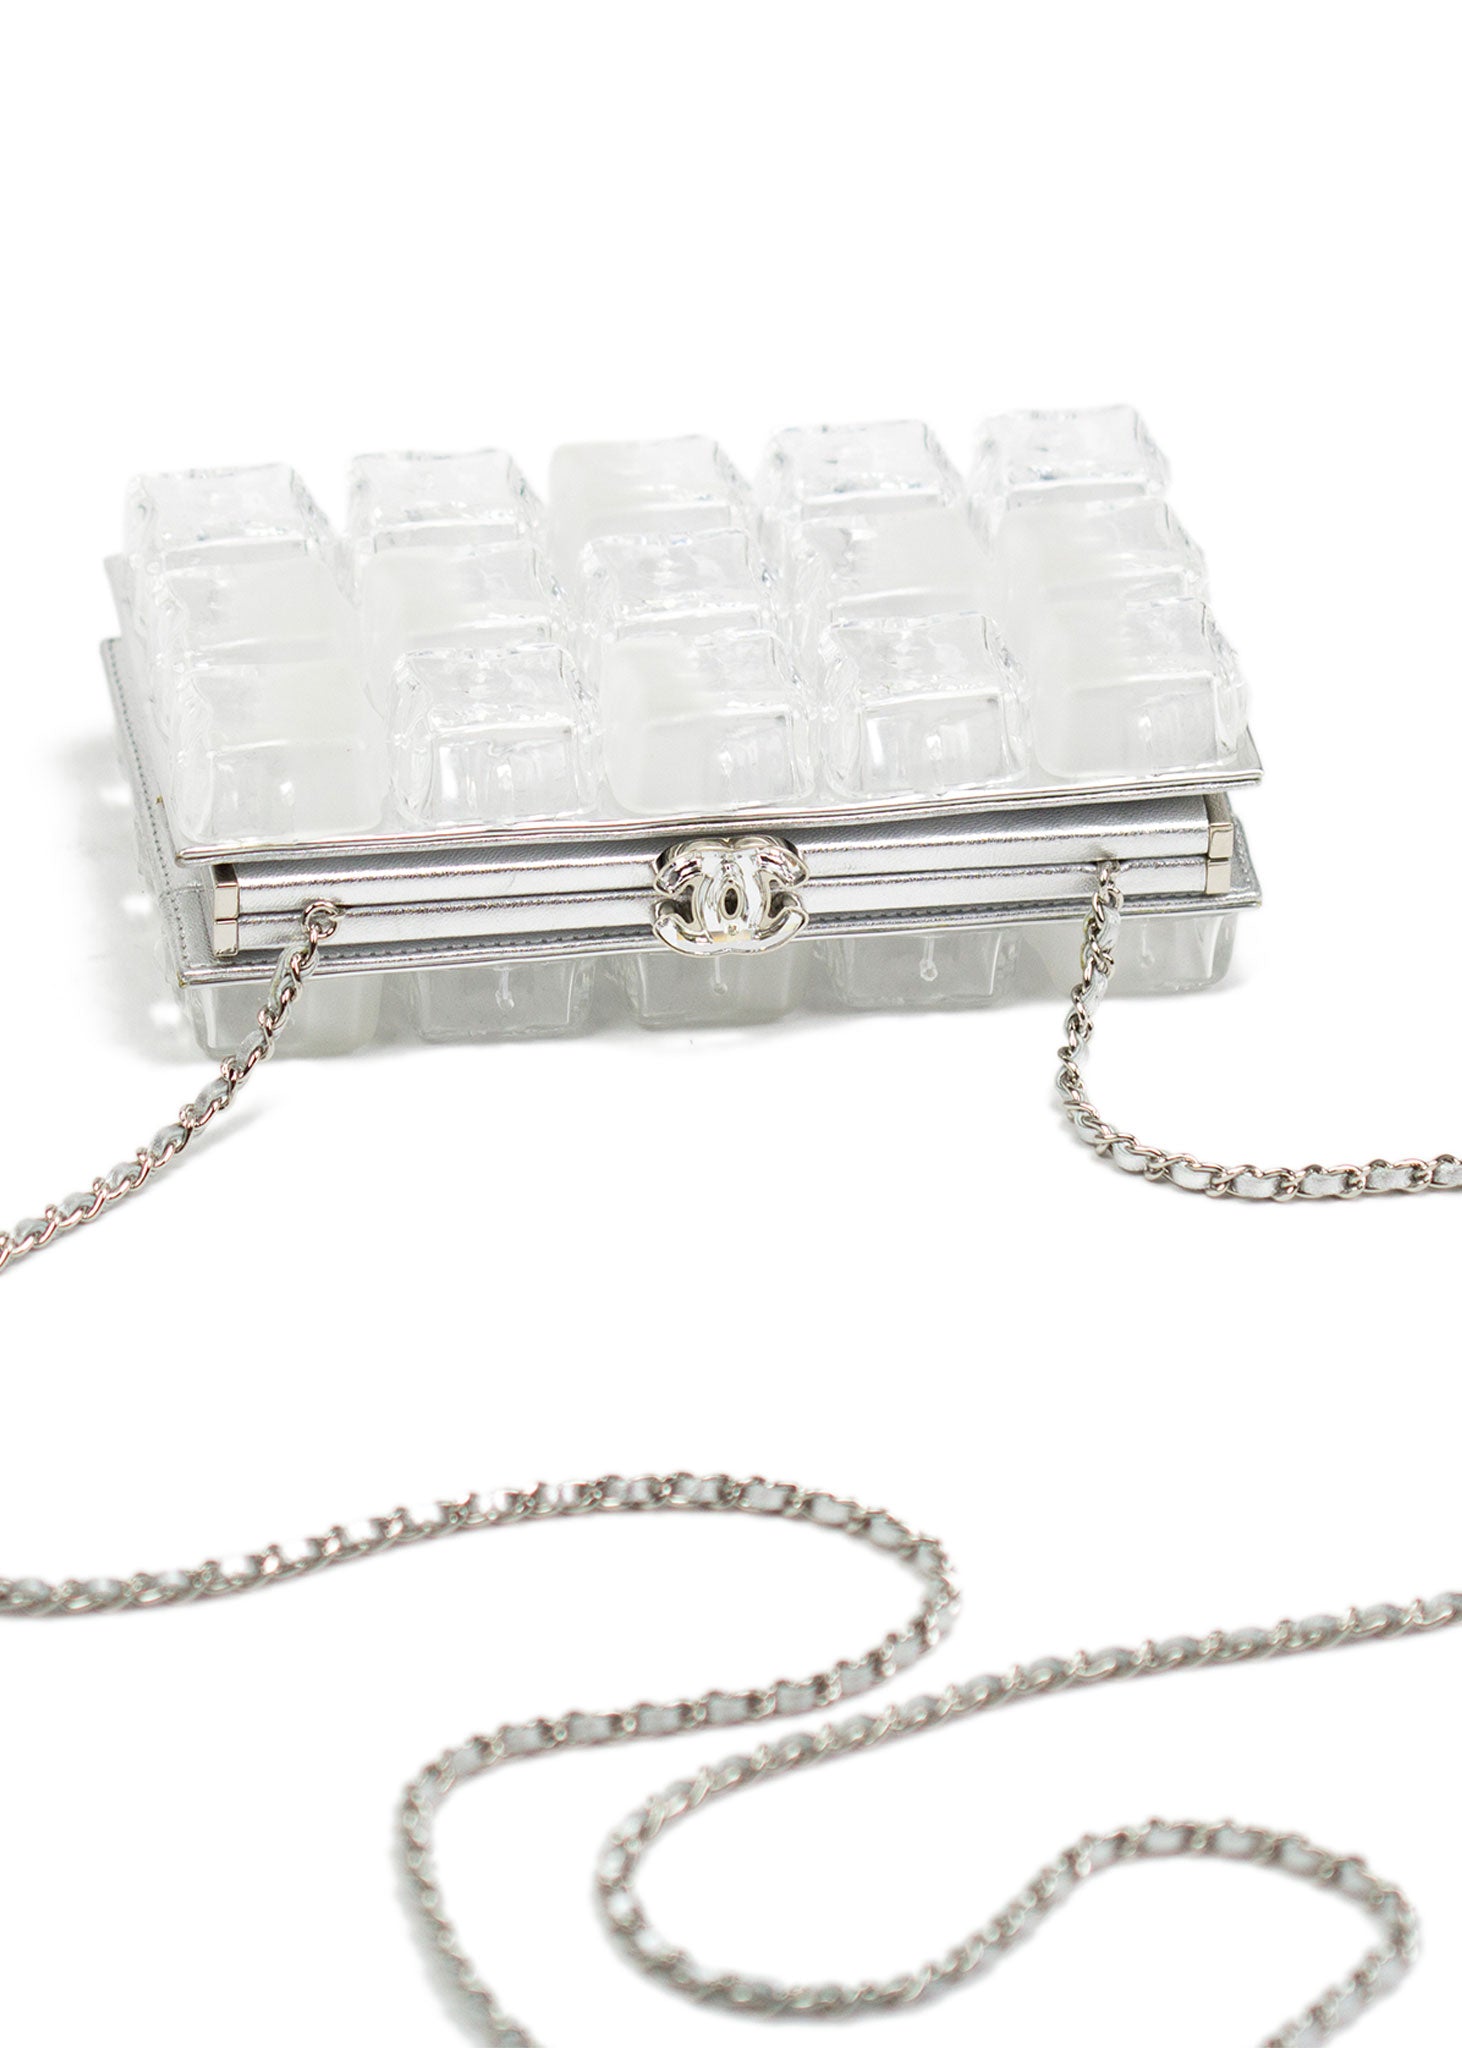 Chanel Fall 2010 Ice Cube Bag  Chanel bag, Chanel accessories